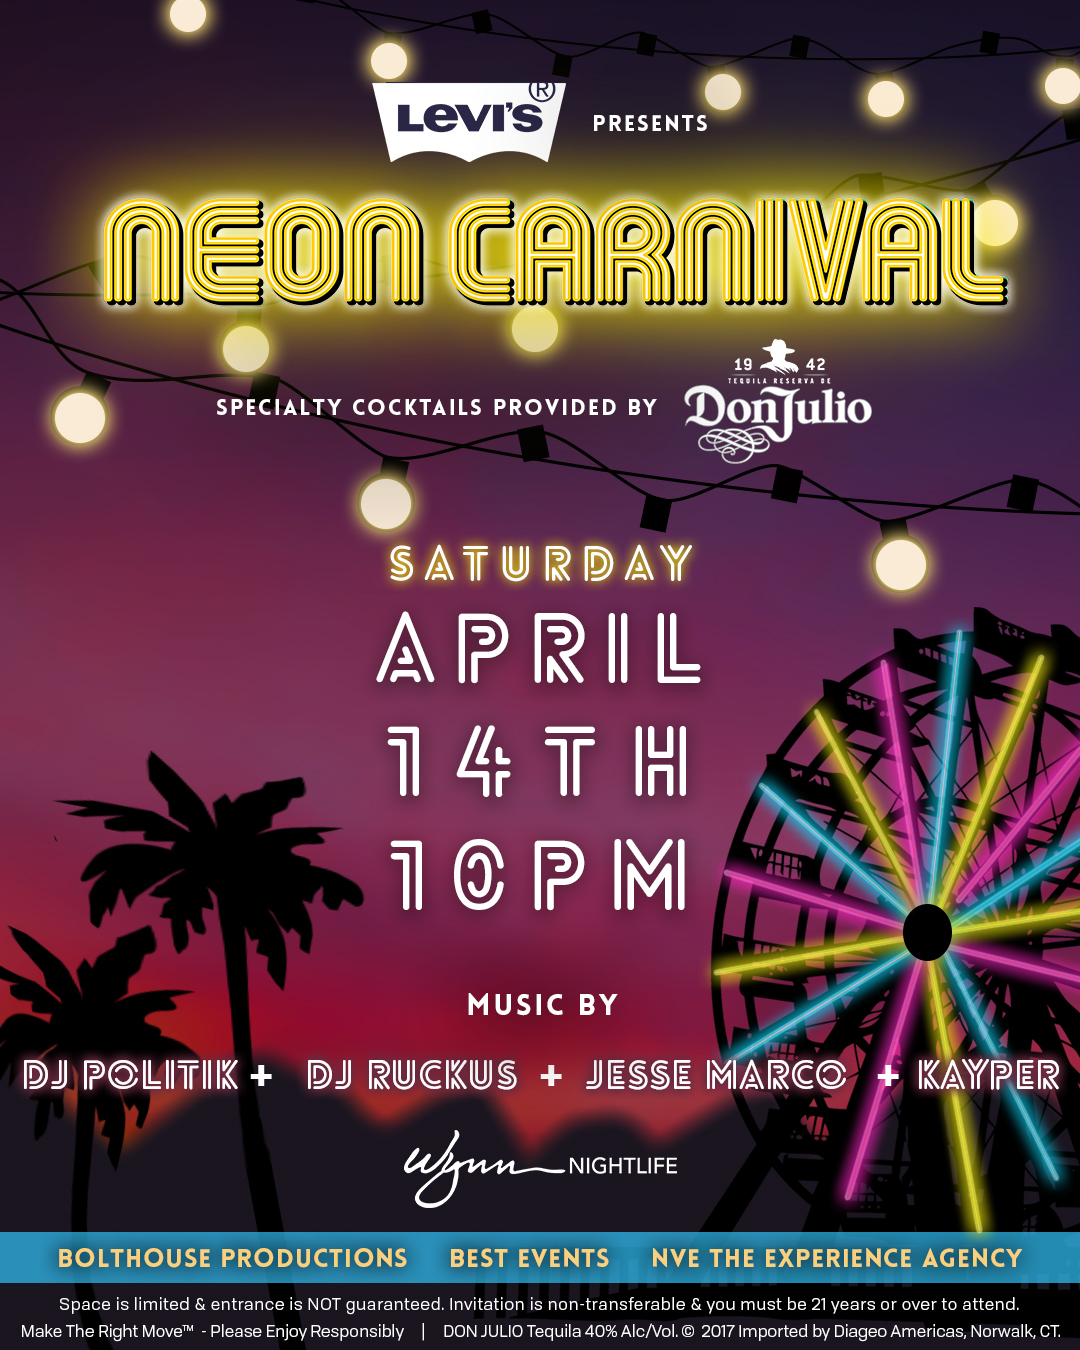 The Levi’s Brand Presents Neon Carnival with TEQUILA DON JULIO During